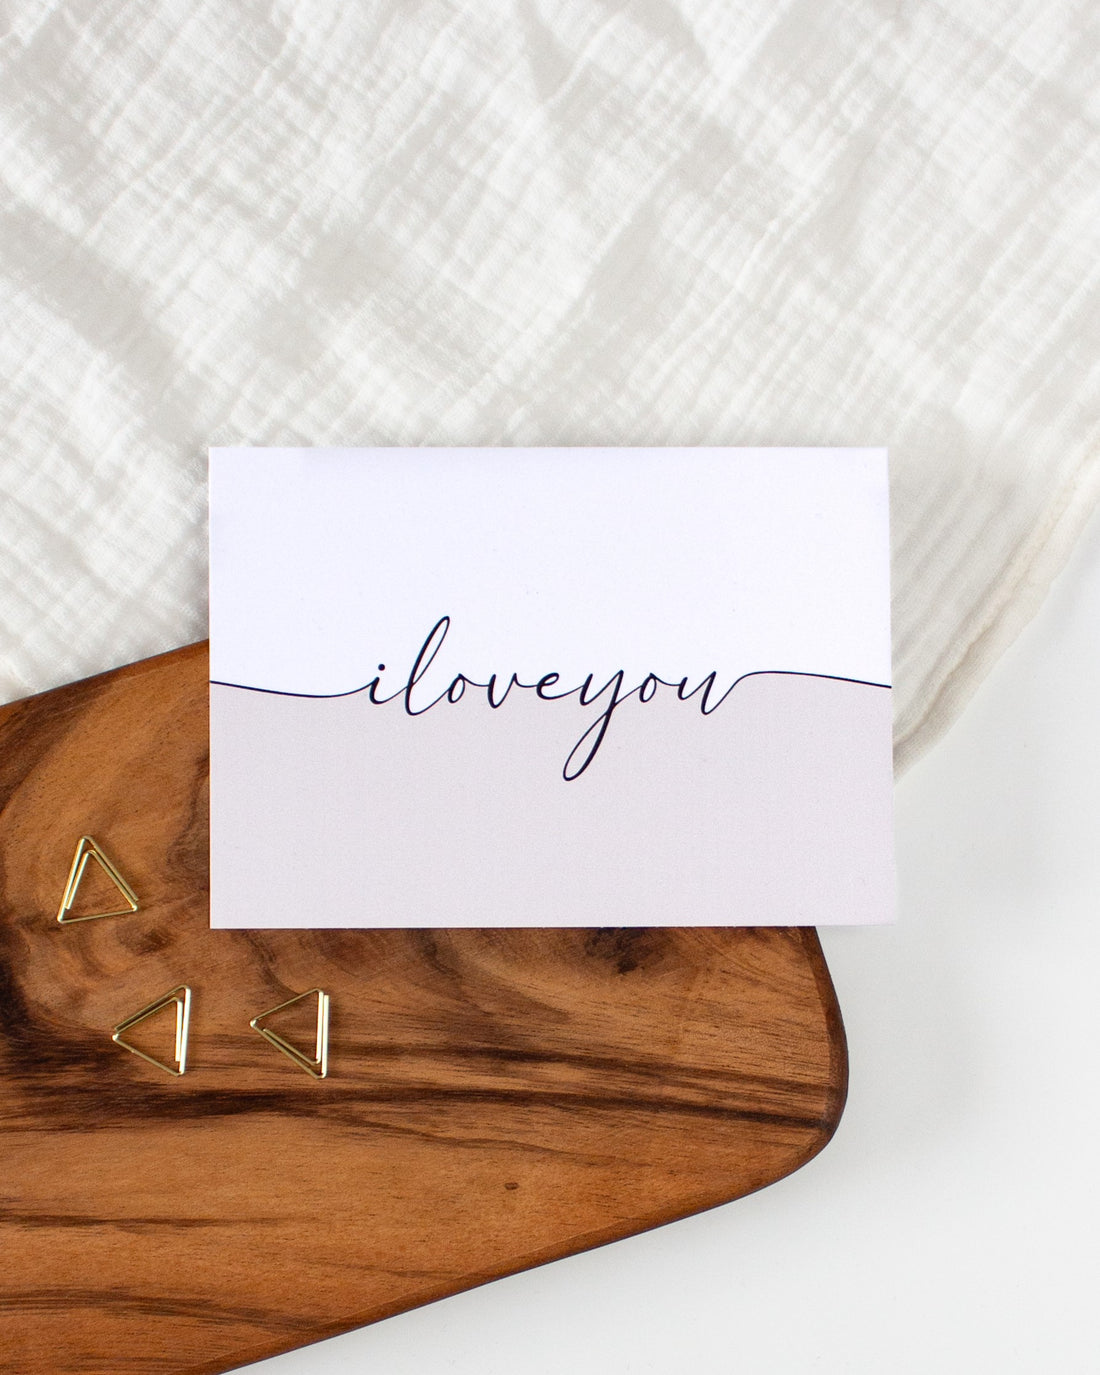 A postcard laying on a wooden board with some golden triangle paperclips and a white cloth in the background. The postcard design reads &quot;I love you&quot; in black cursive writing, that splits the card into two halves. The top half is white and the bottom half is beige.